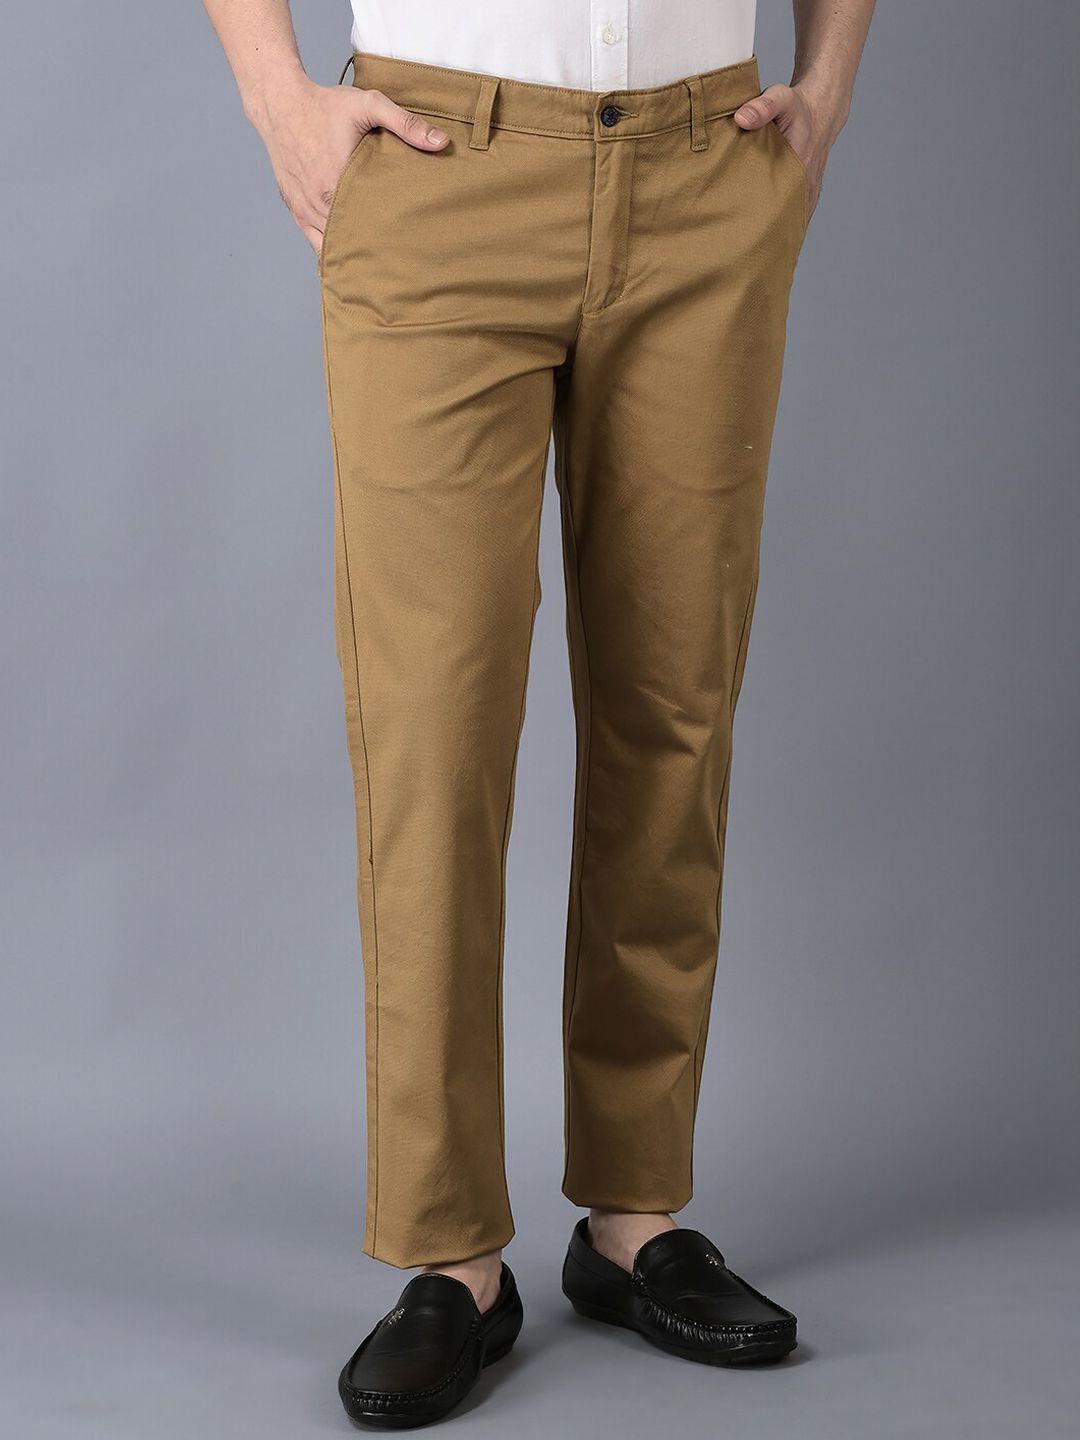 canoe-men-mid-rise-smart-chinos-trousers